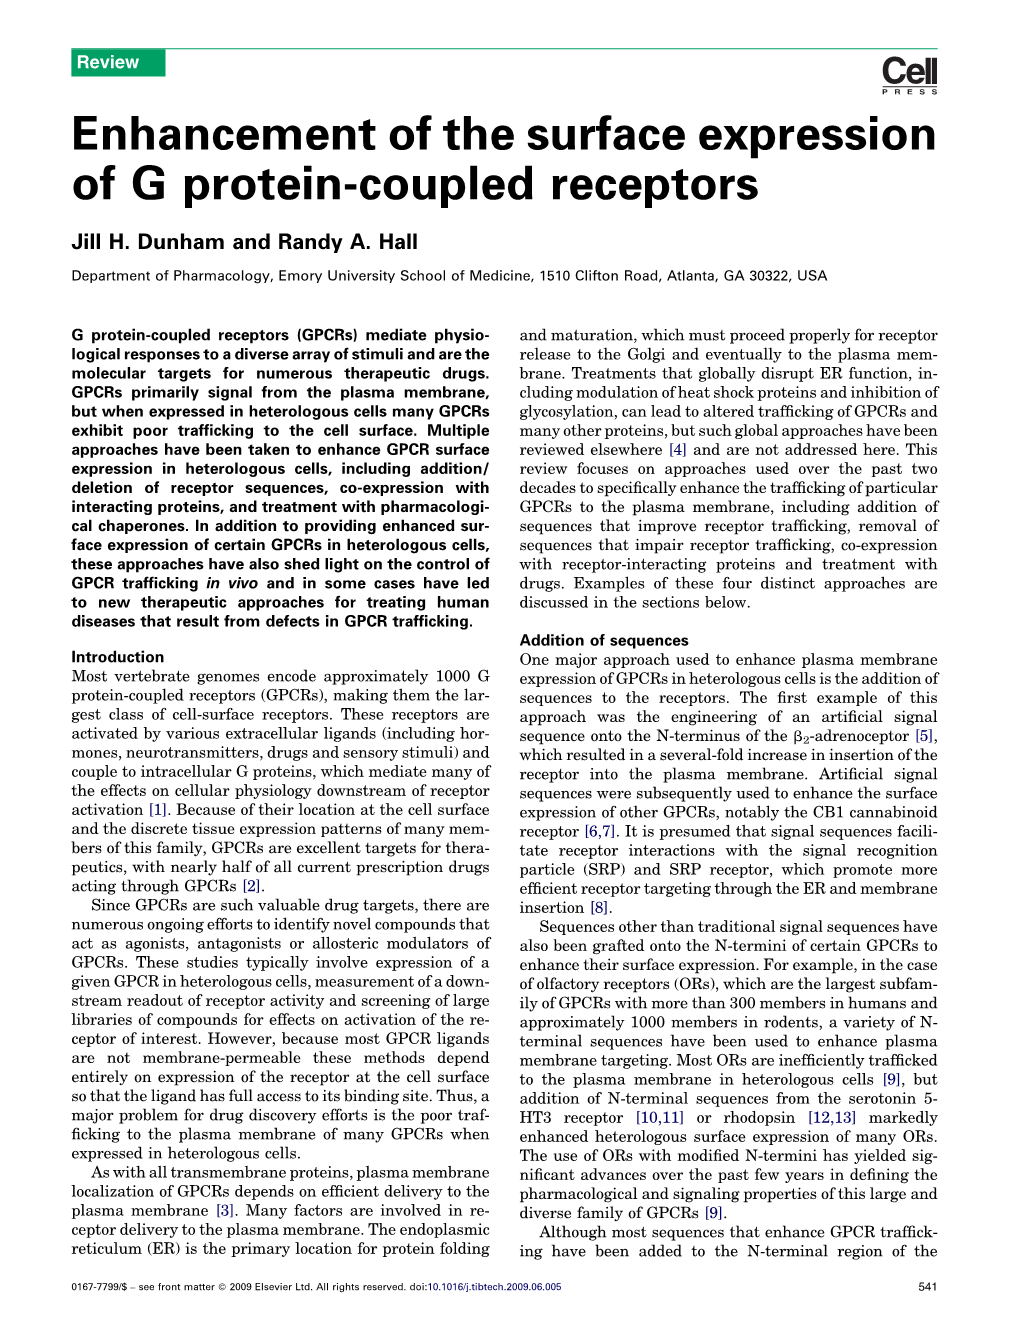 Enhancement of the Surface Expression of G Protein-Coupled Receptors